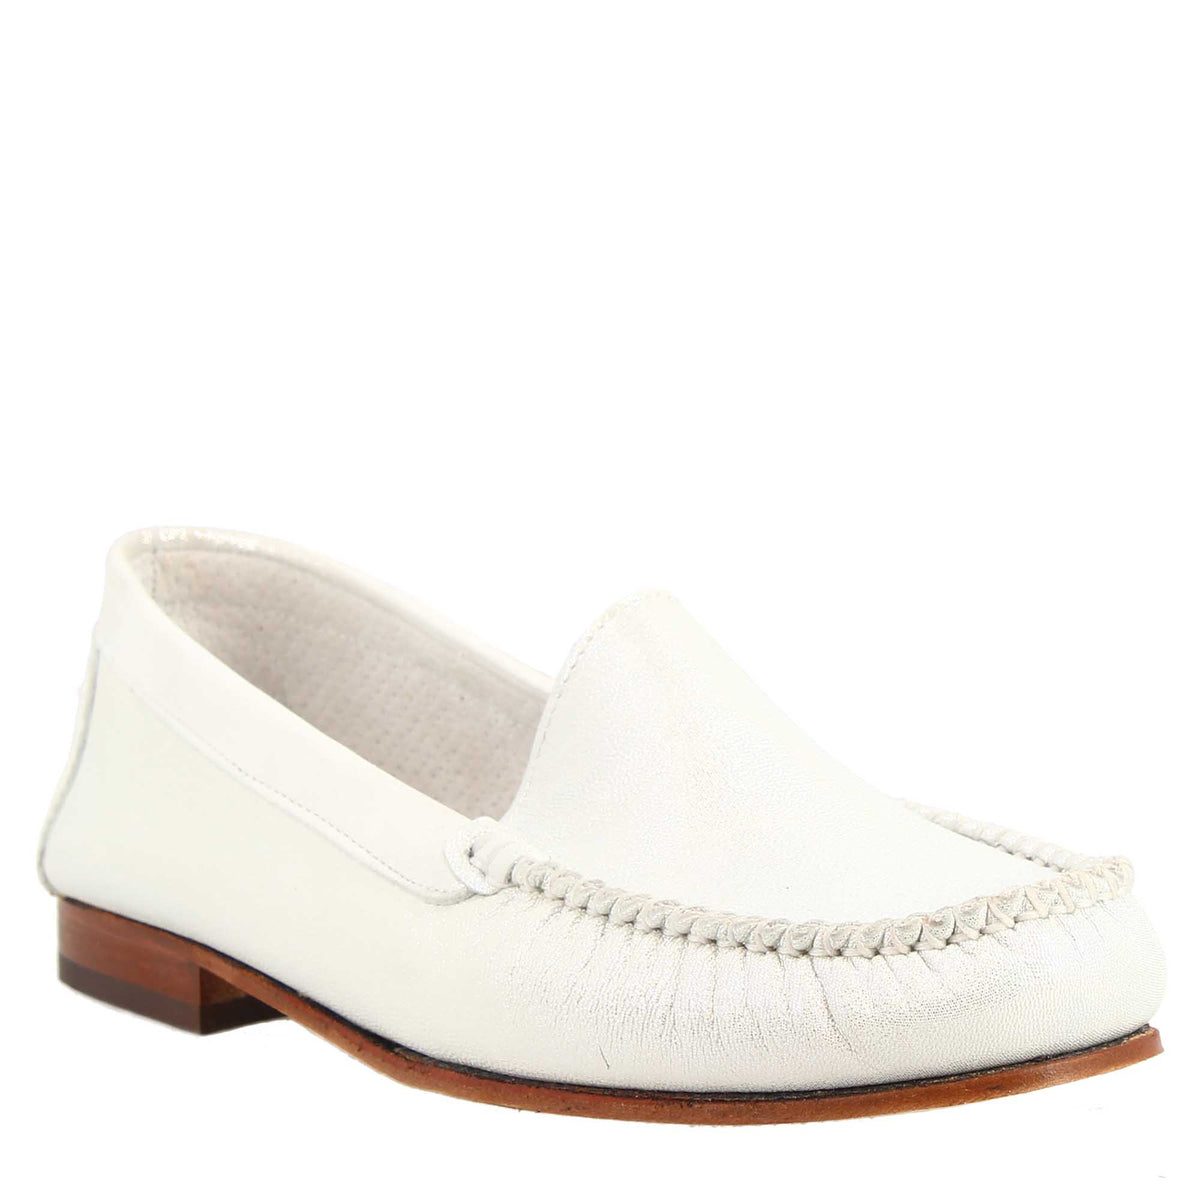 Handmade loafers for women in silver leather